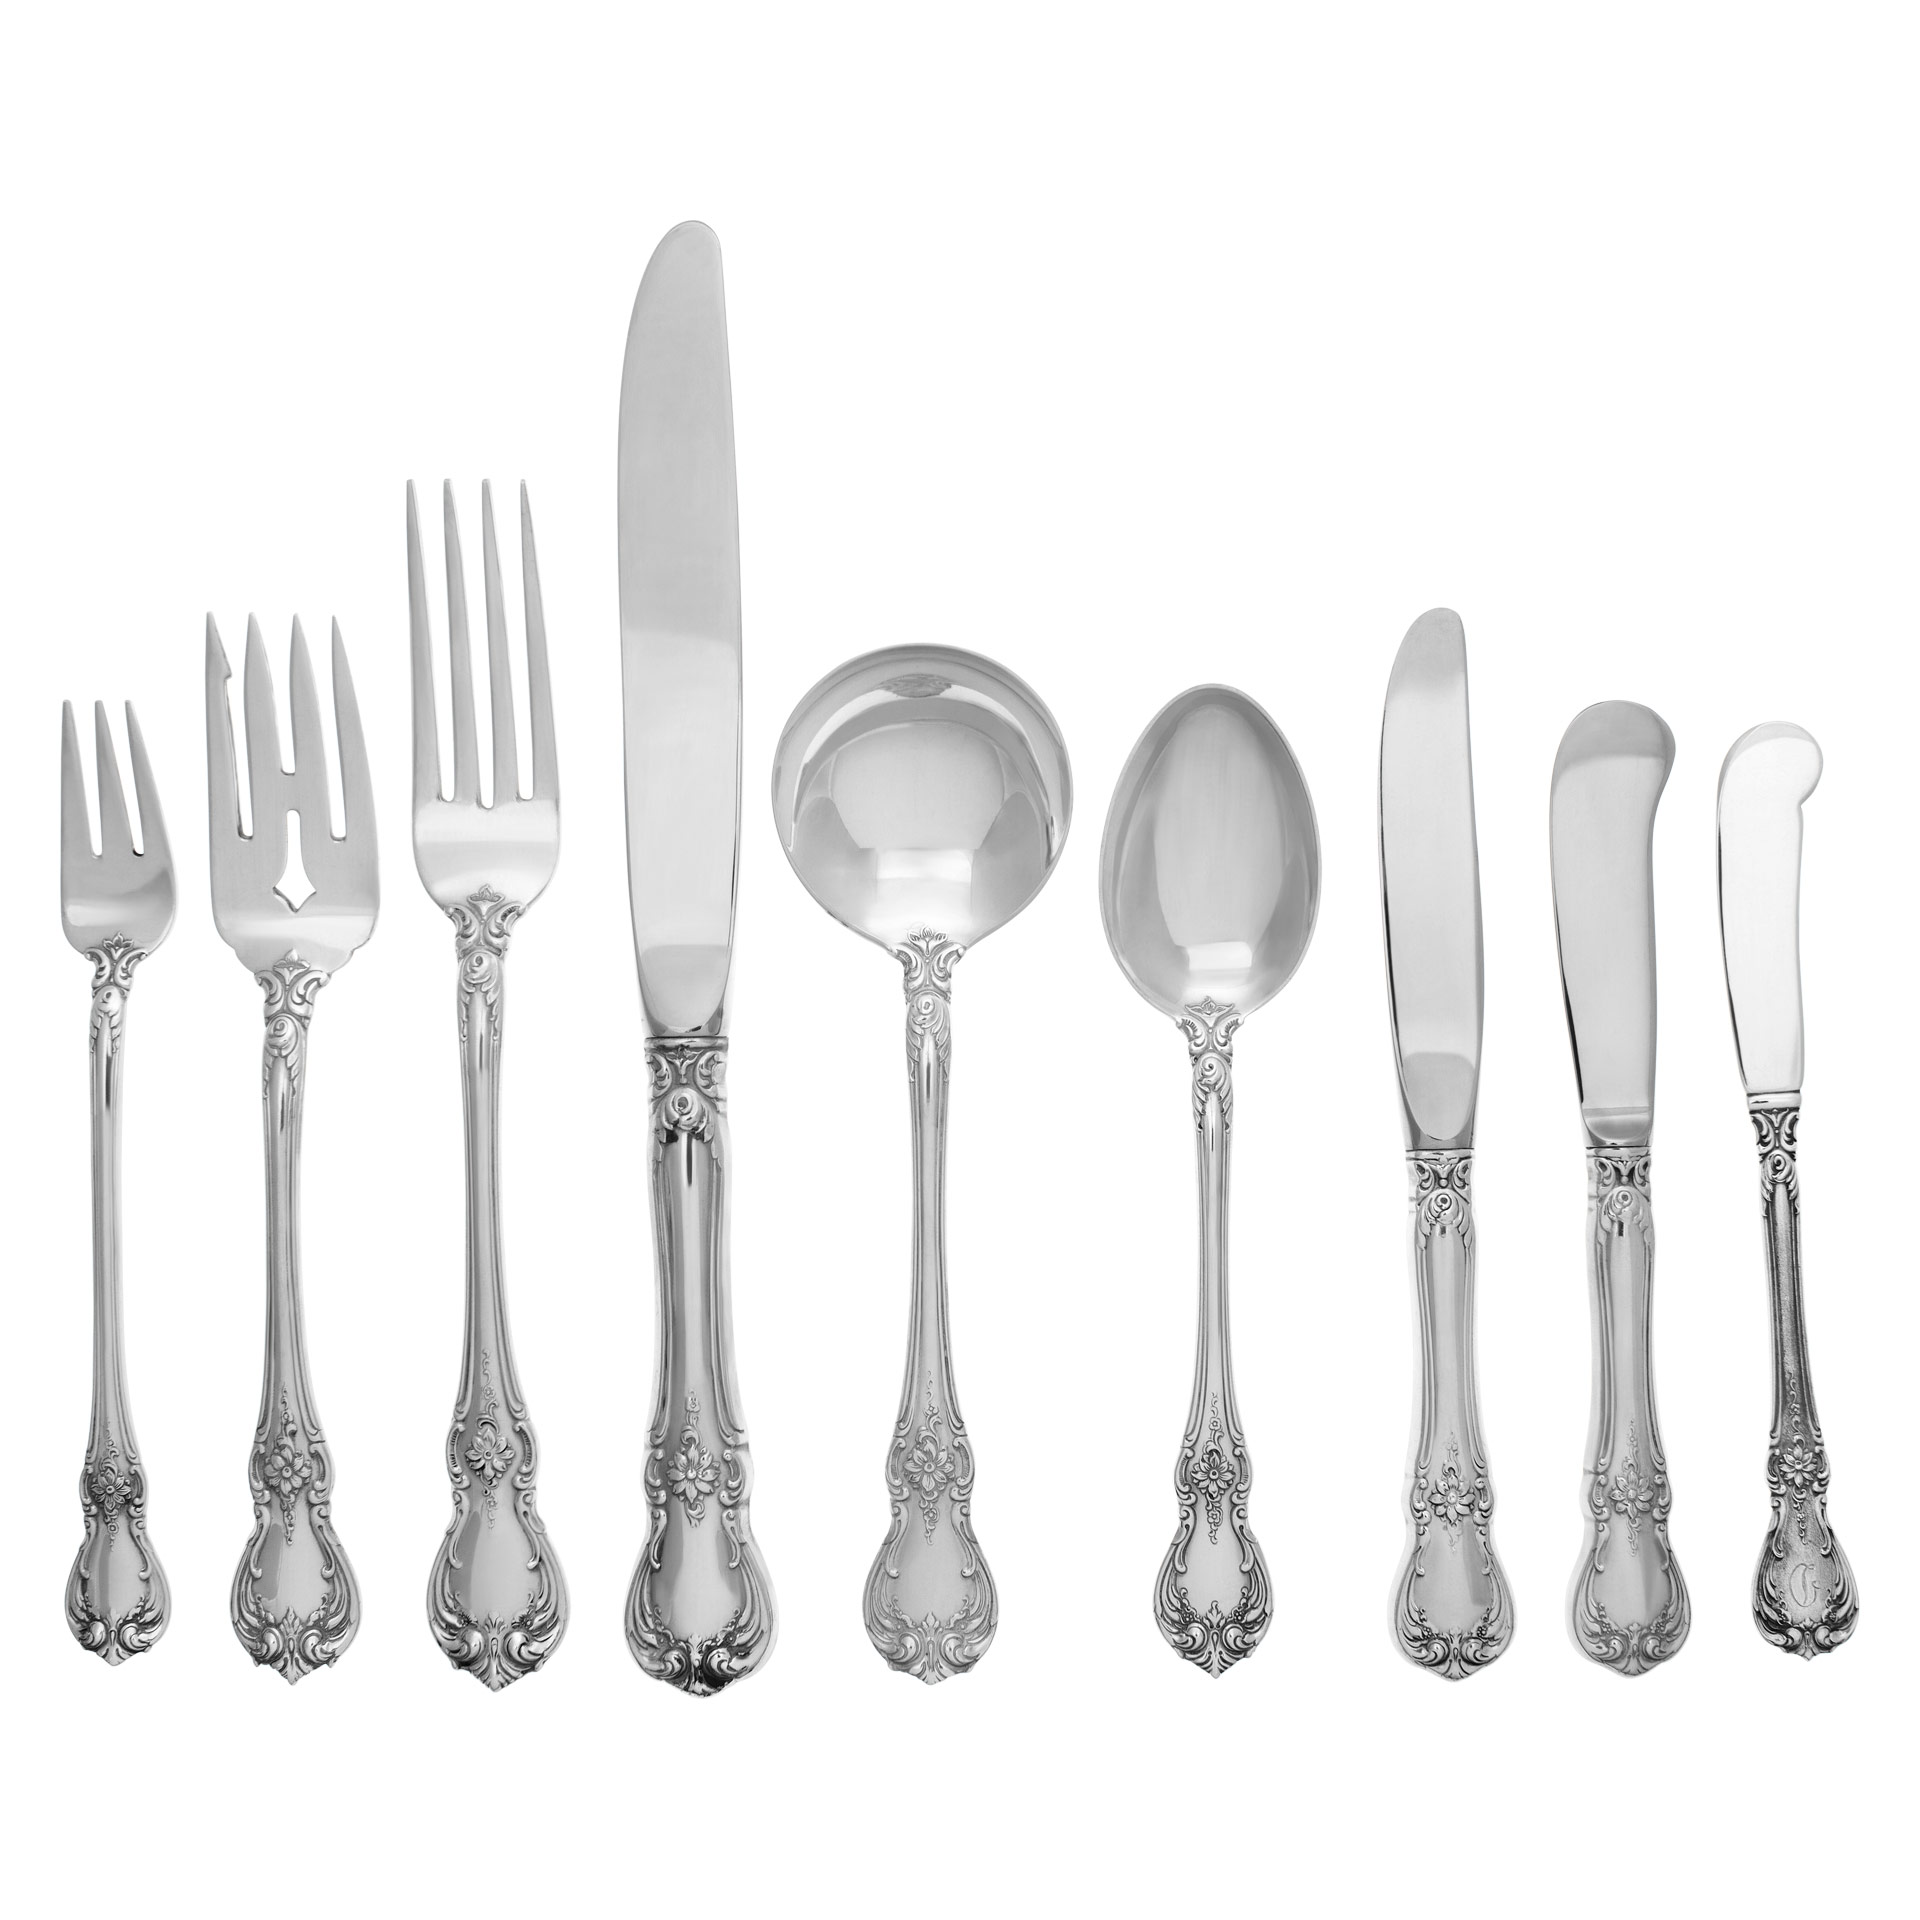 "OLD MASTER" Sterling Silver Flatware Set, Ptd in 1942  by Towle Silversmiths. 128 PIECES TOTAL- 6 Place Settings for 20 (xtra) + 7 Serving Pieces- 162 ounces troy of .925  Sterling Silver.TOTAL 139 pieces.